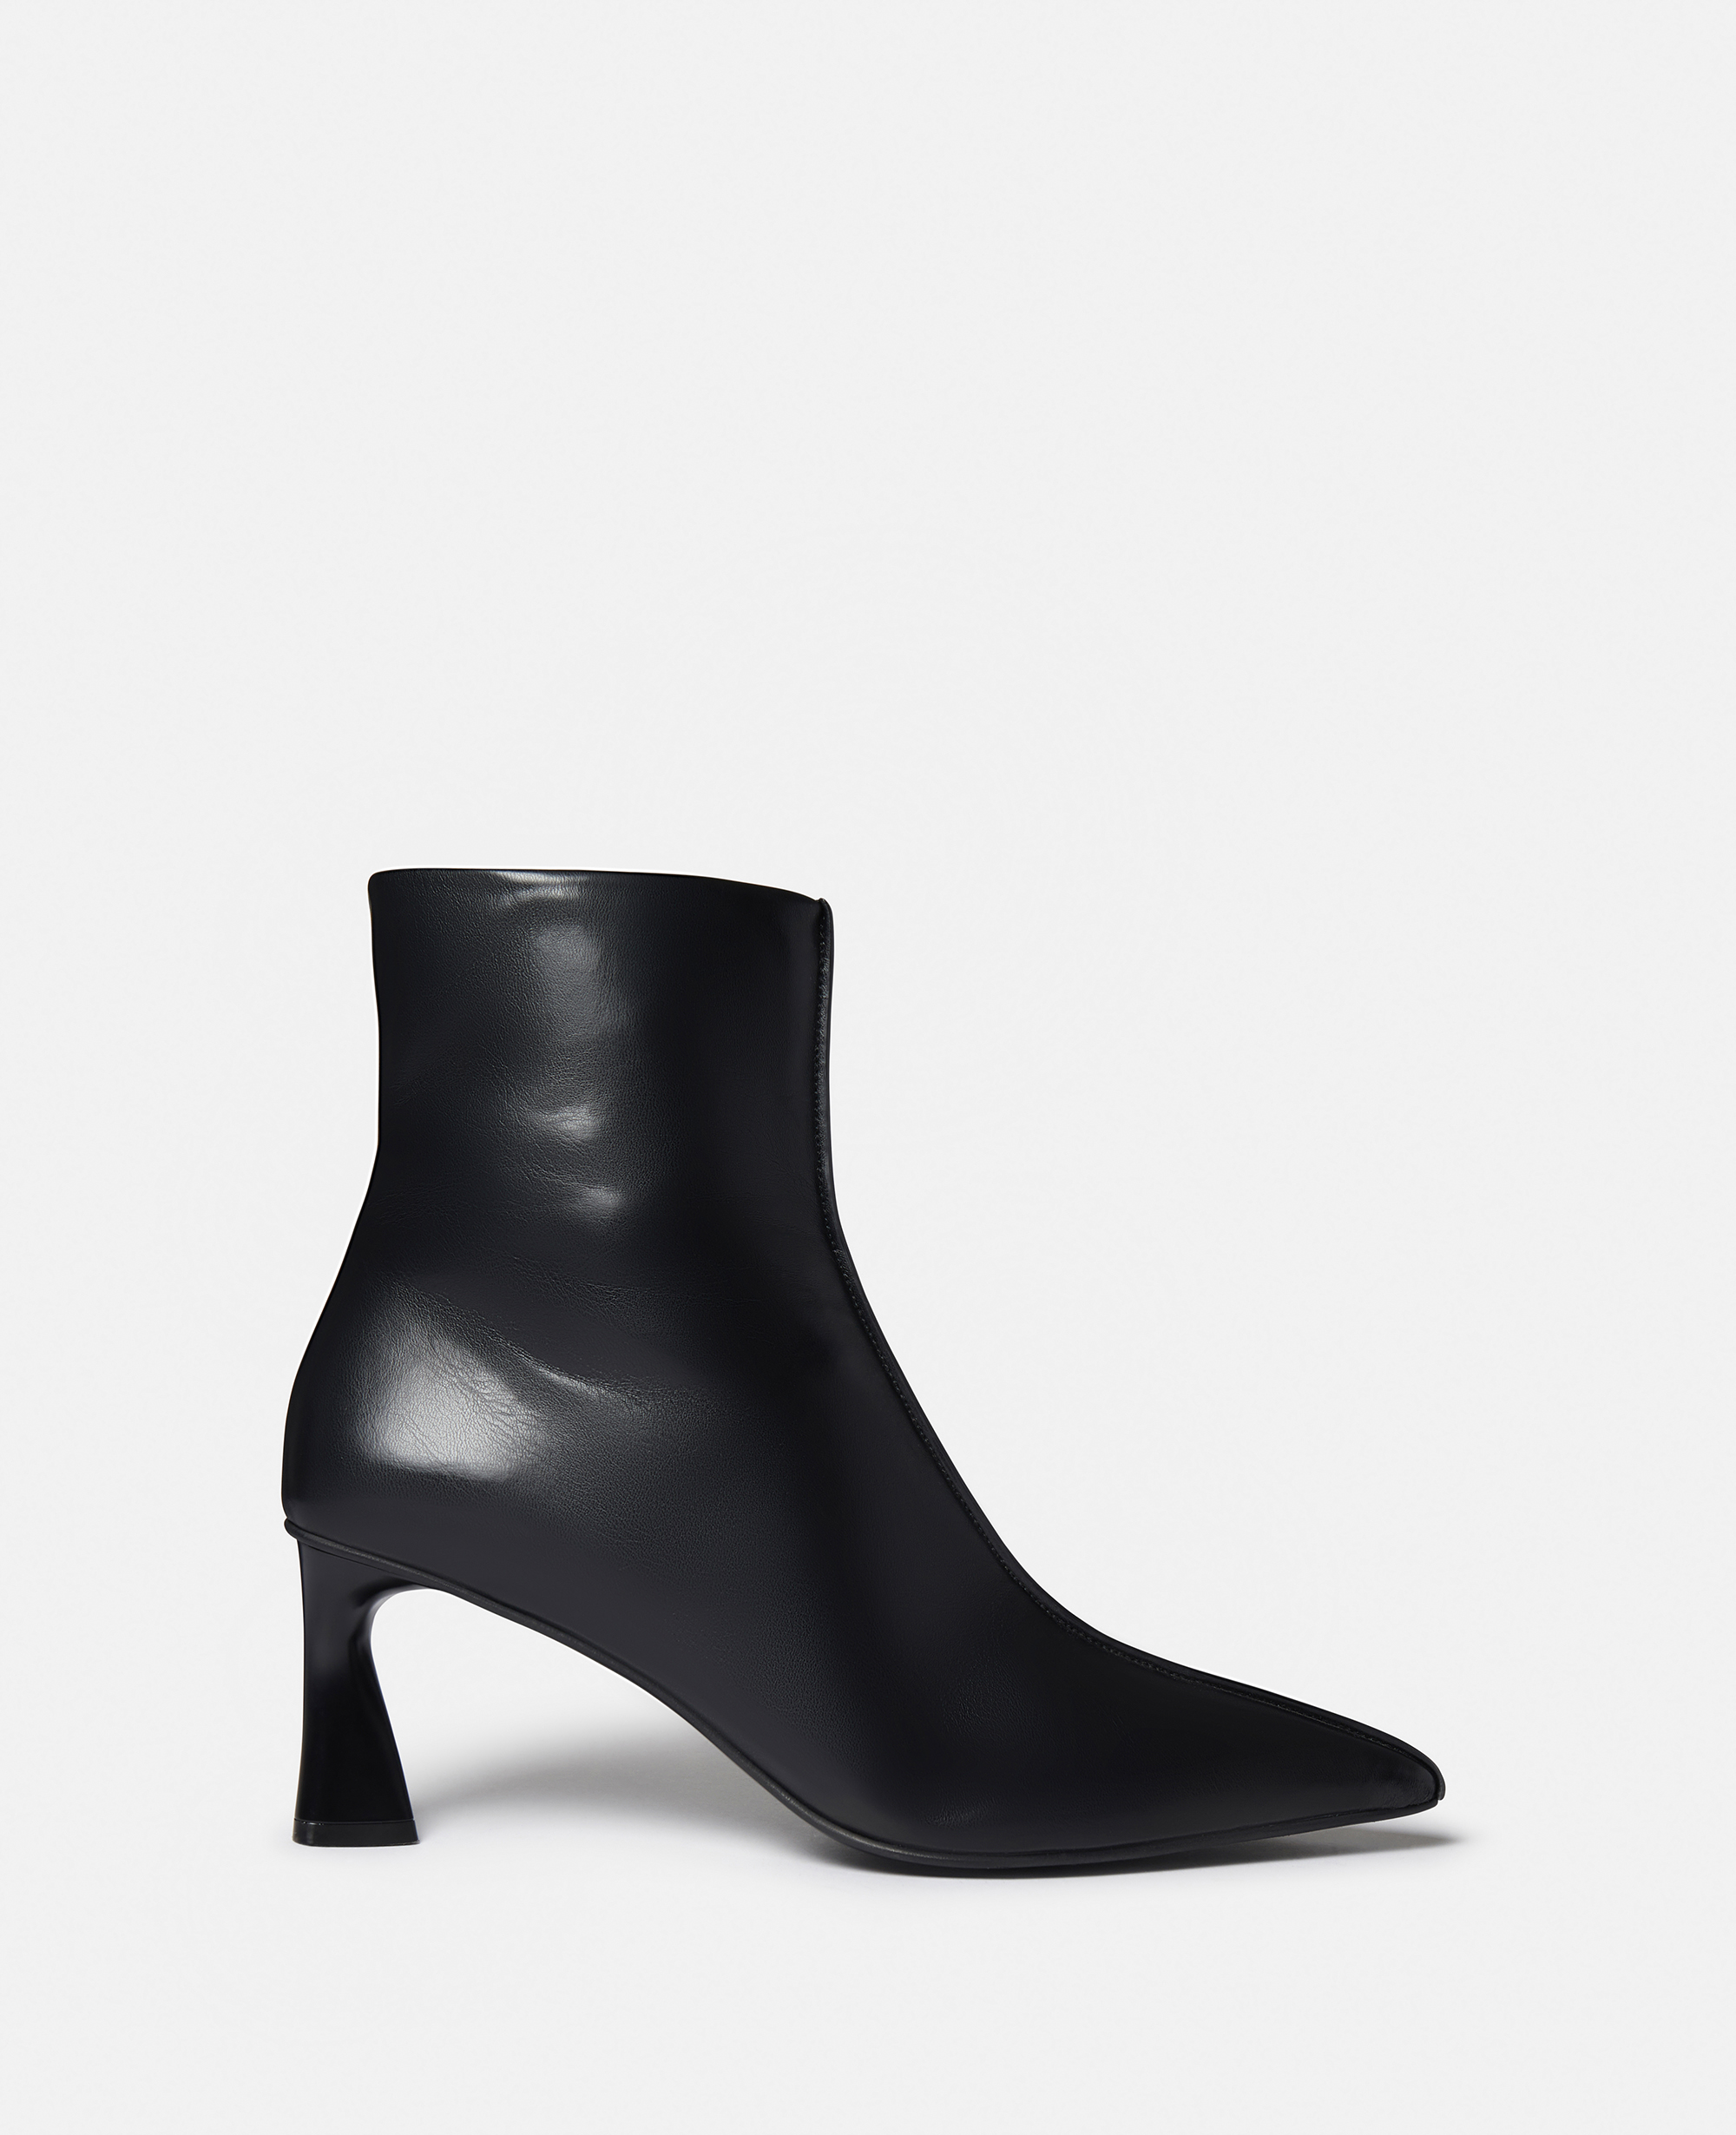 Stella Mccartney Elsa Pointed Toe Ankle Boots In Black